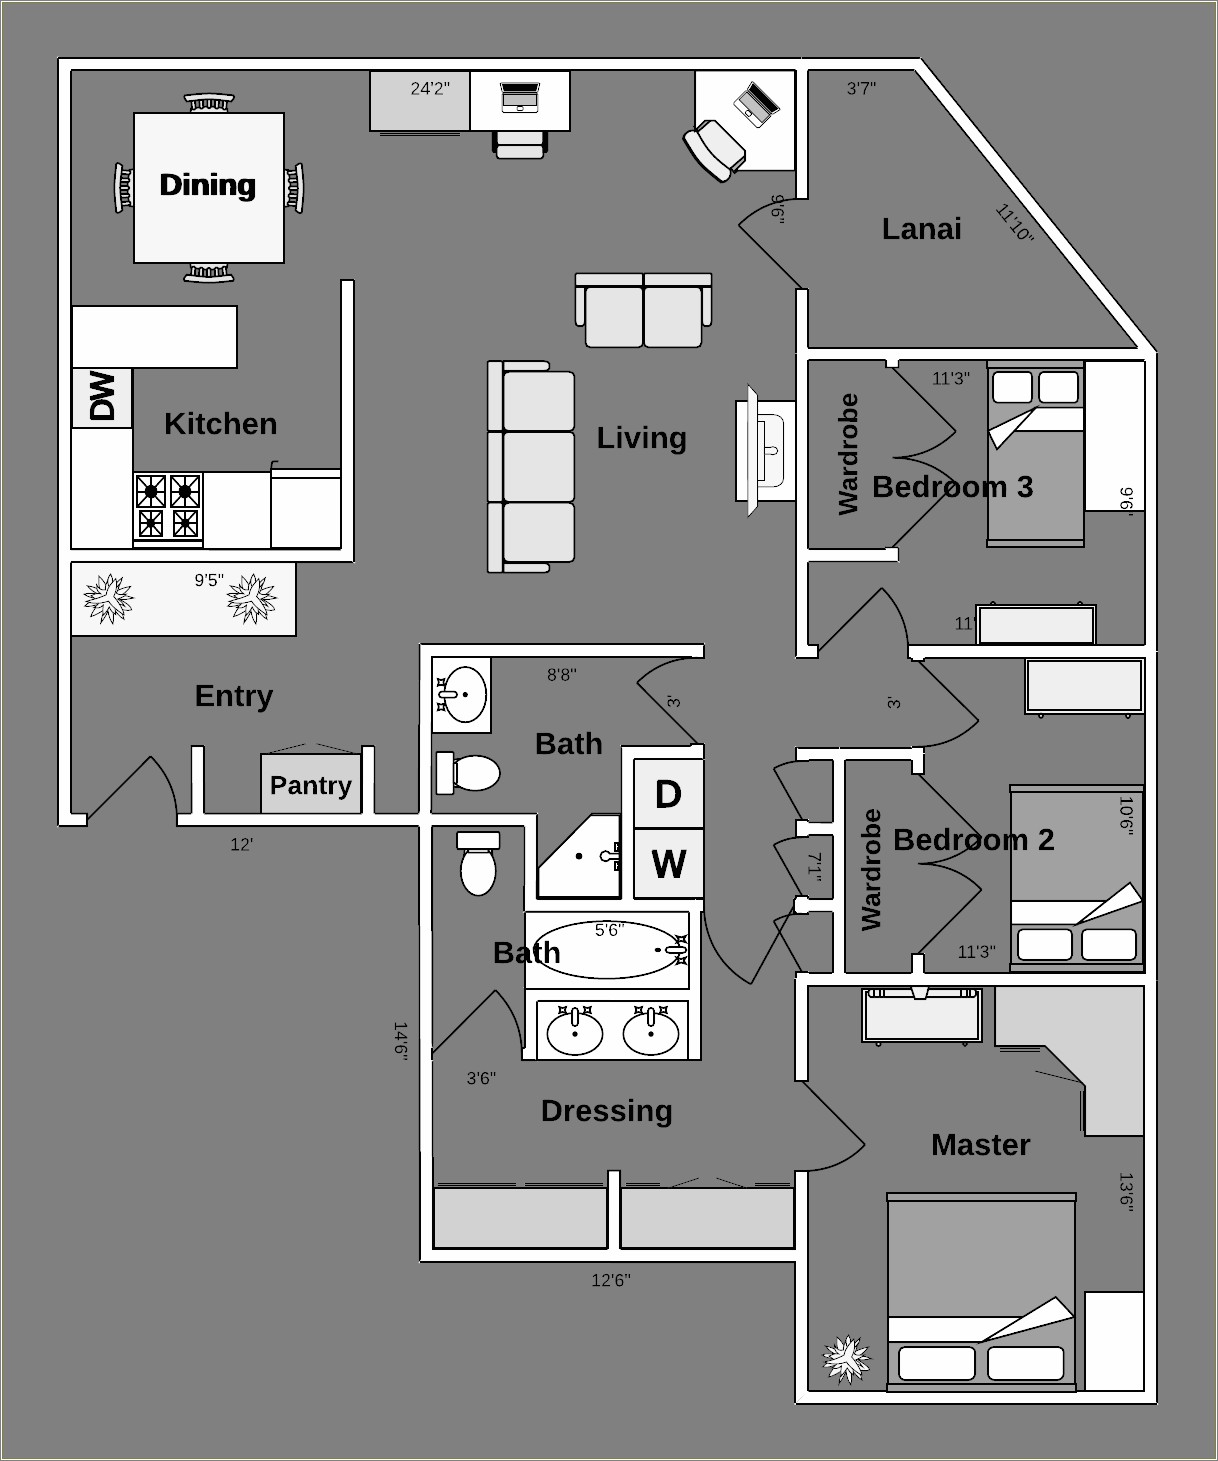 Free Fire Exit Floor Plan Template